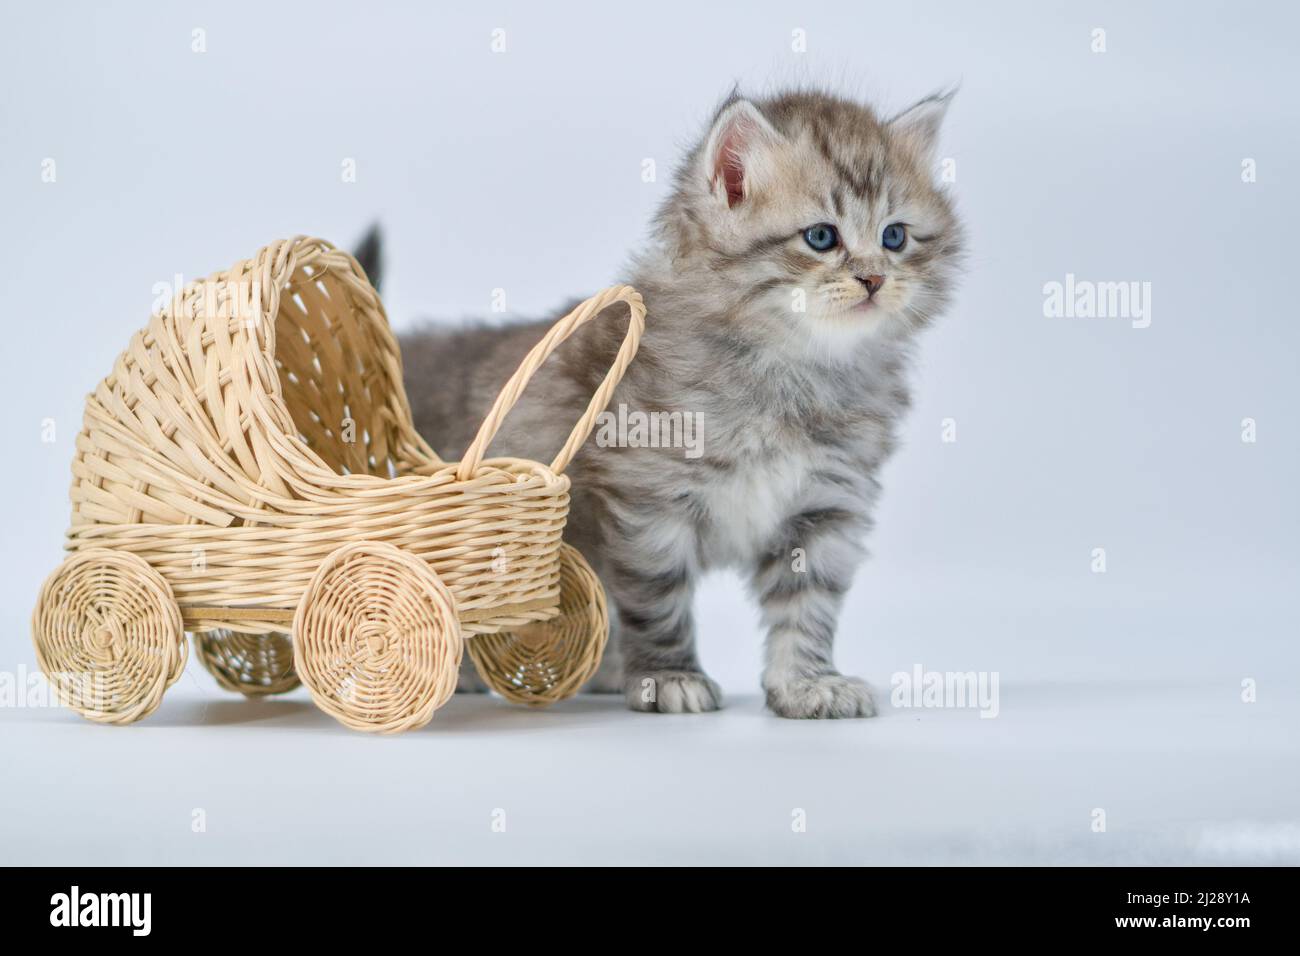 Siberian kitten on a white background with a stroller Stock Photo